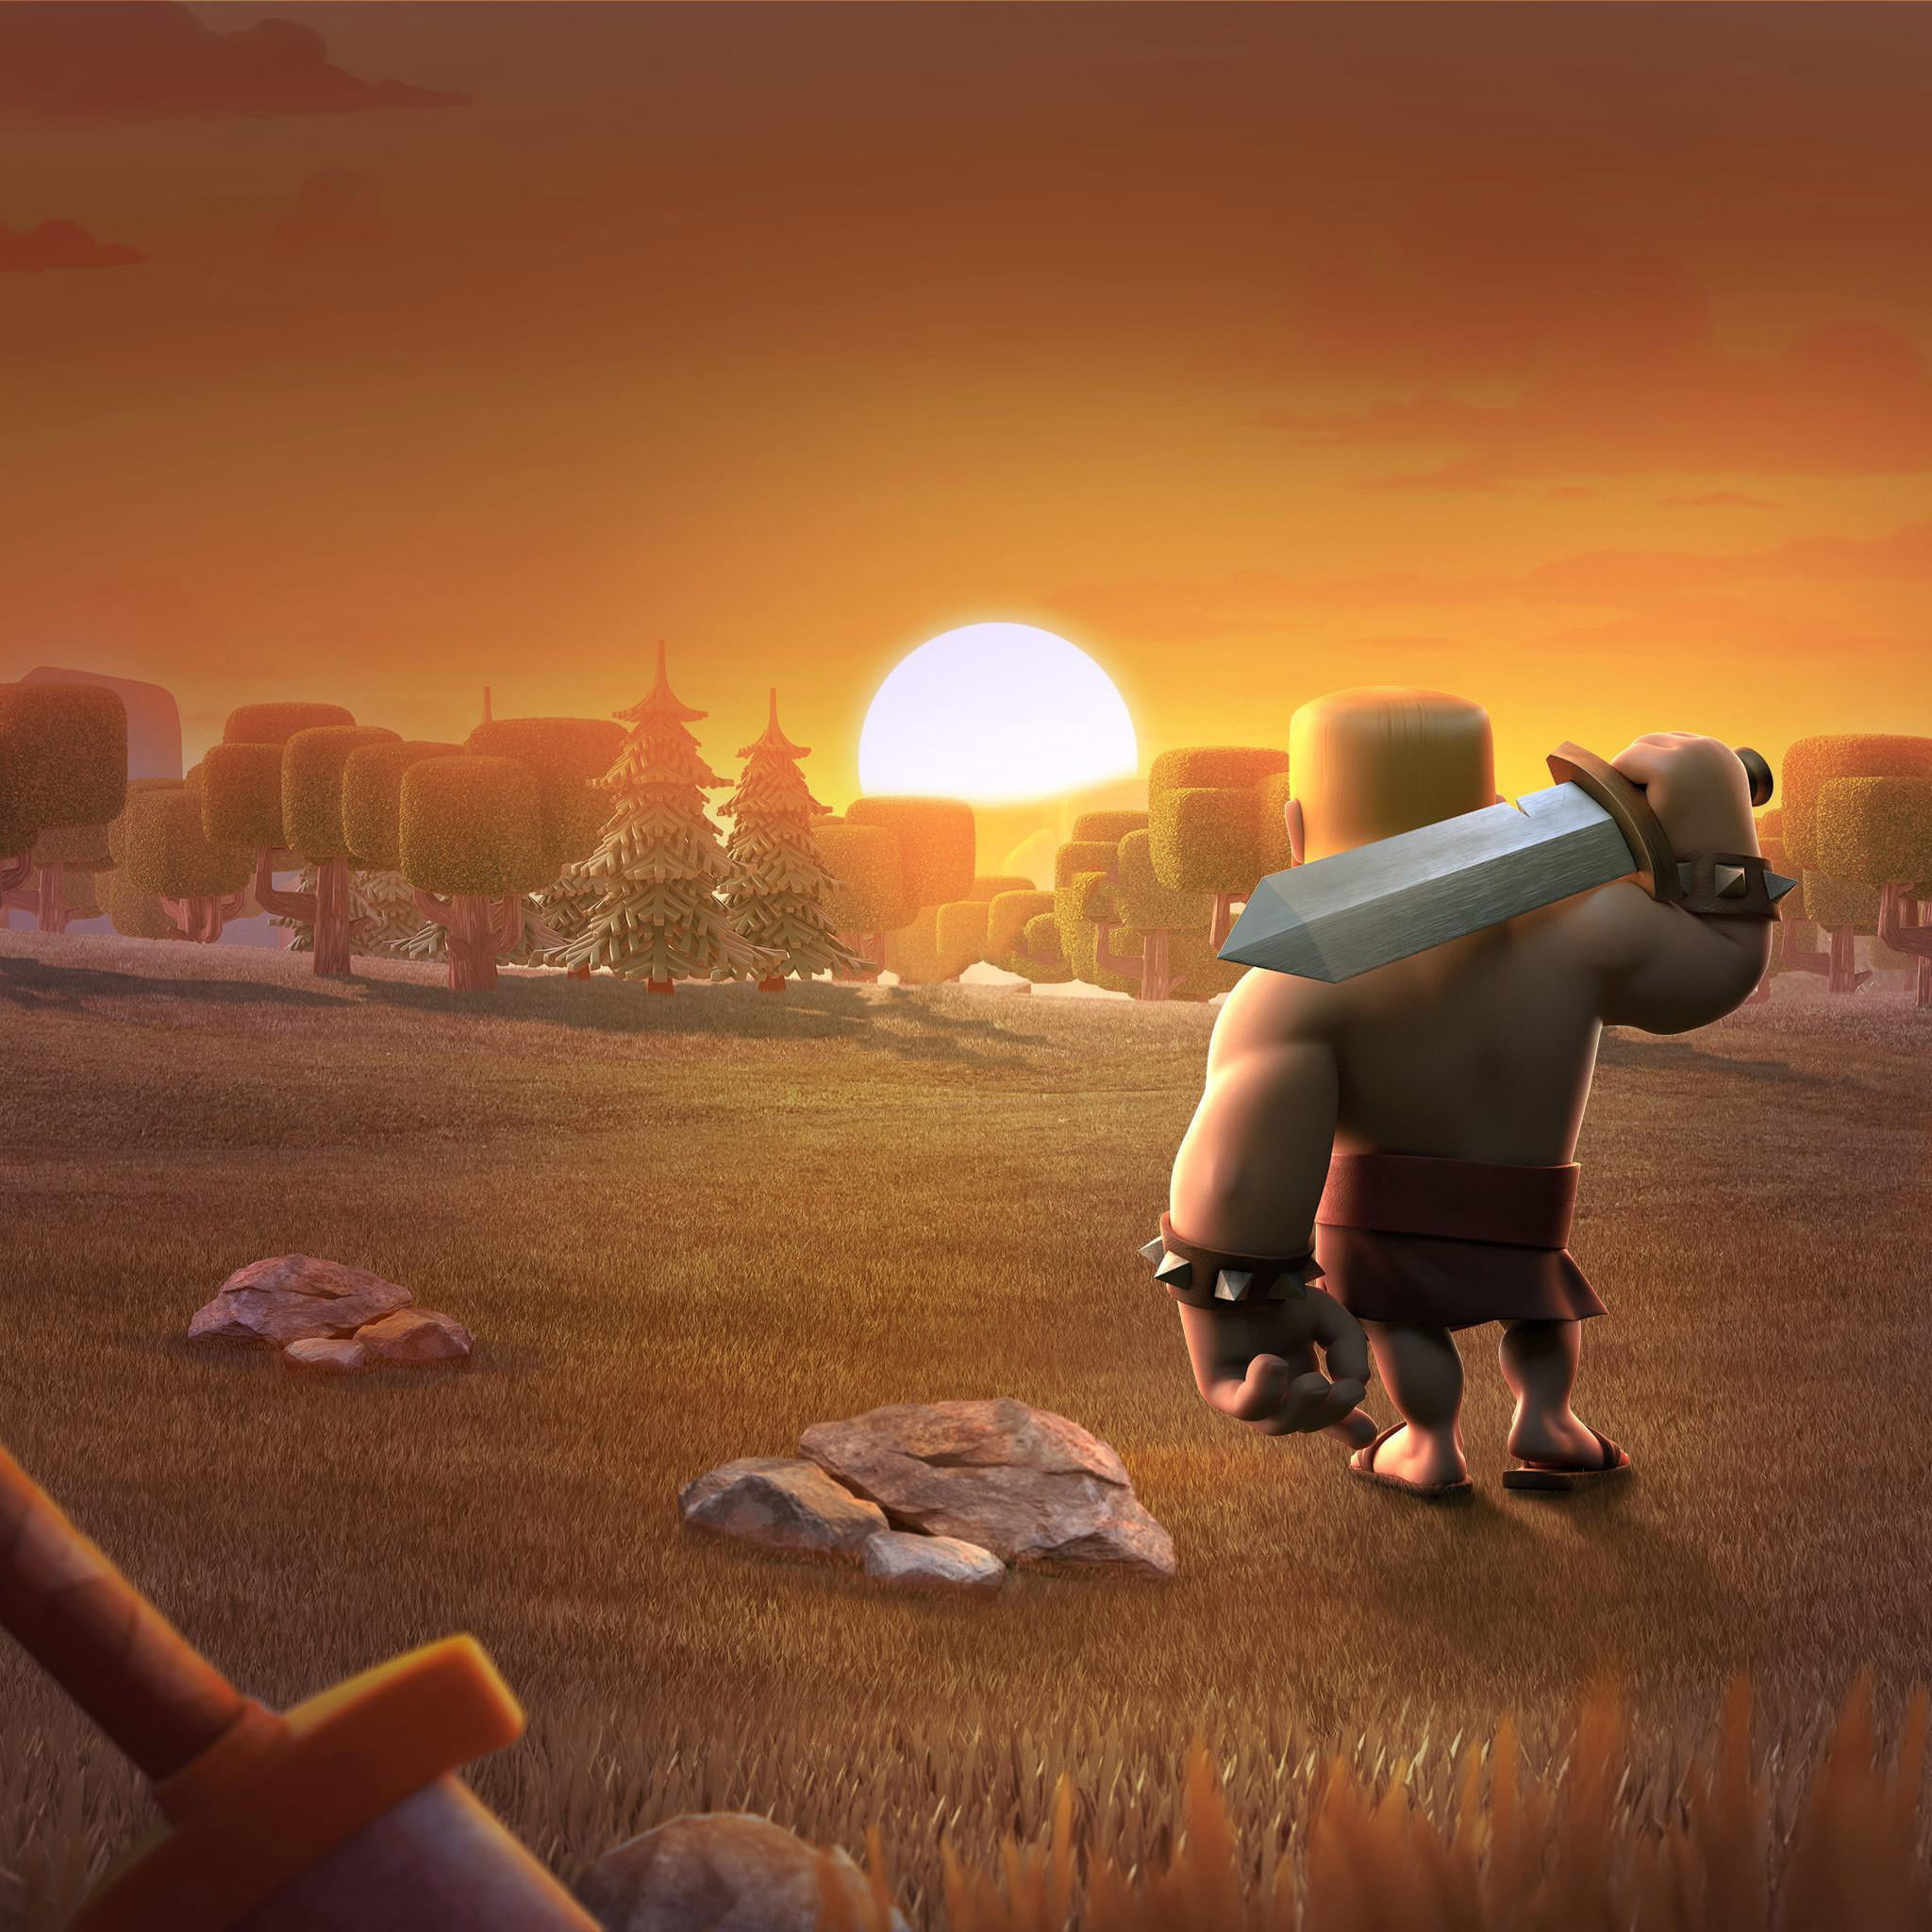 barbarian, clash of clans, supercell, games, hd, sunset, sky